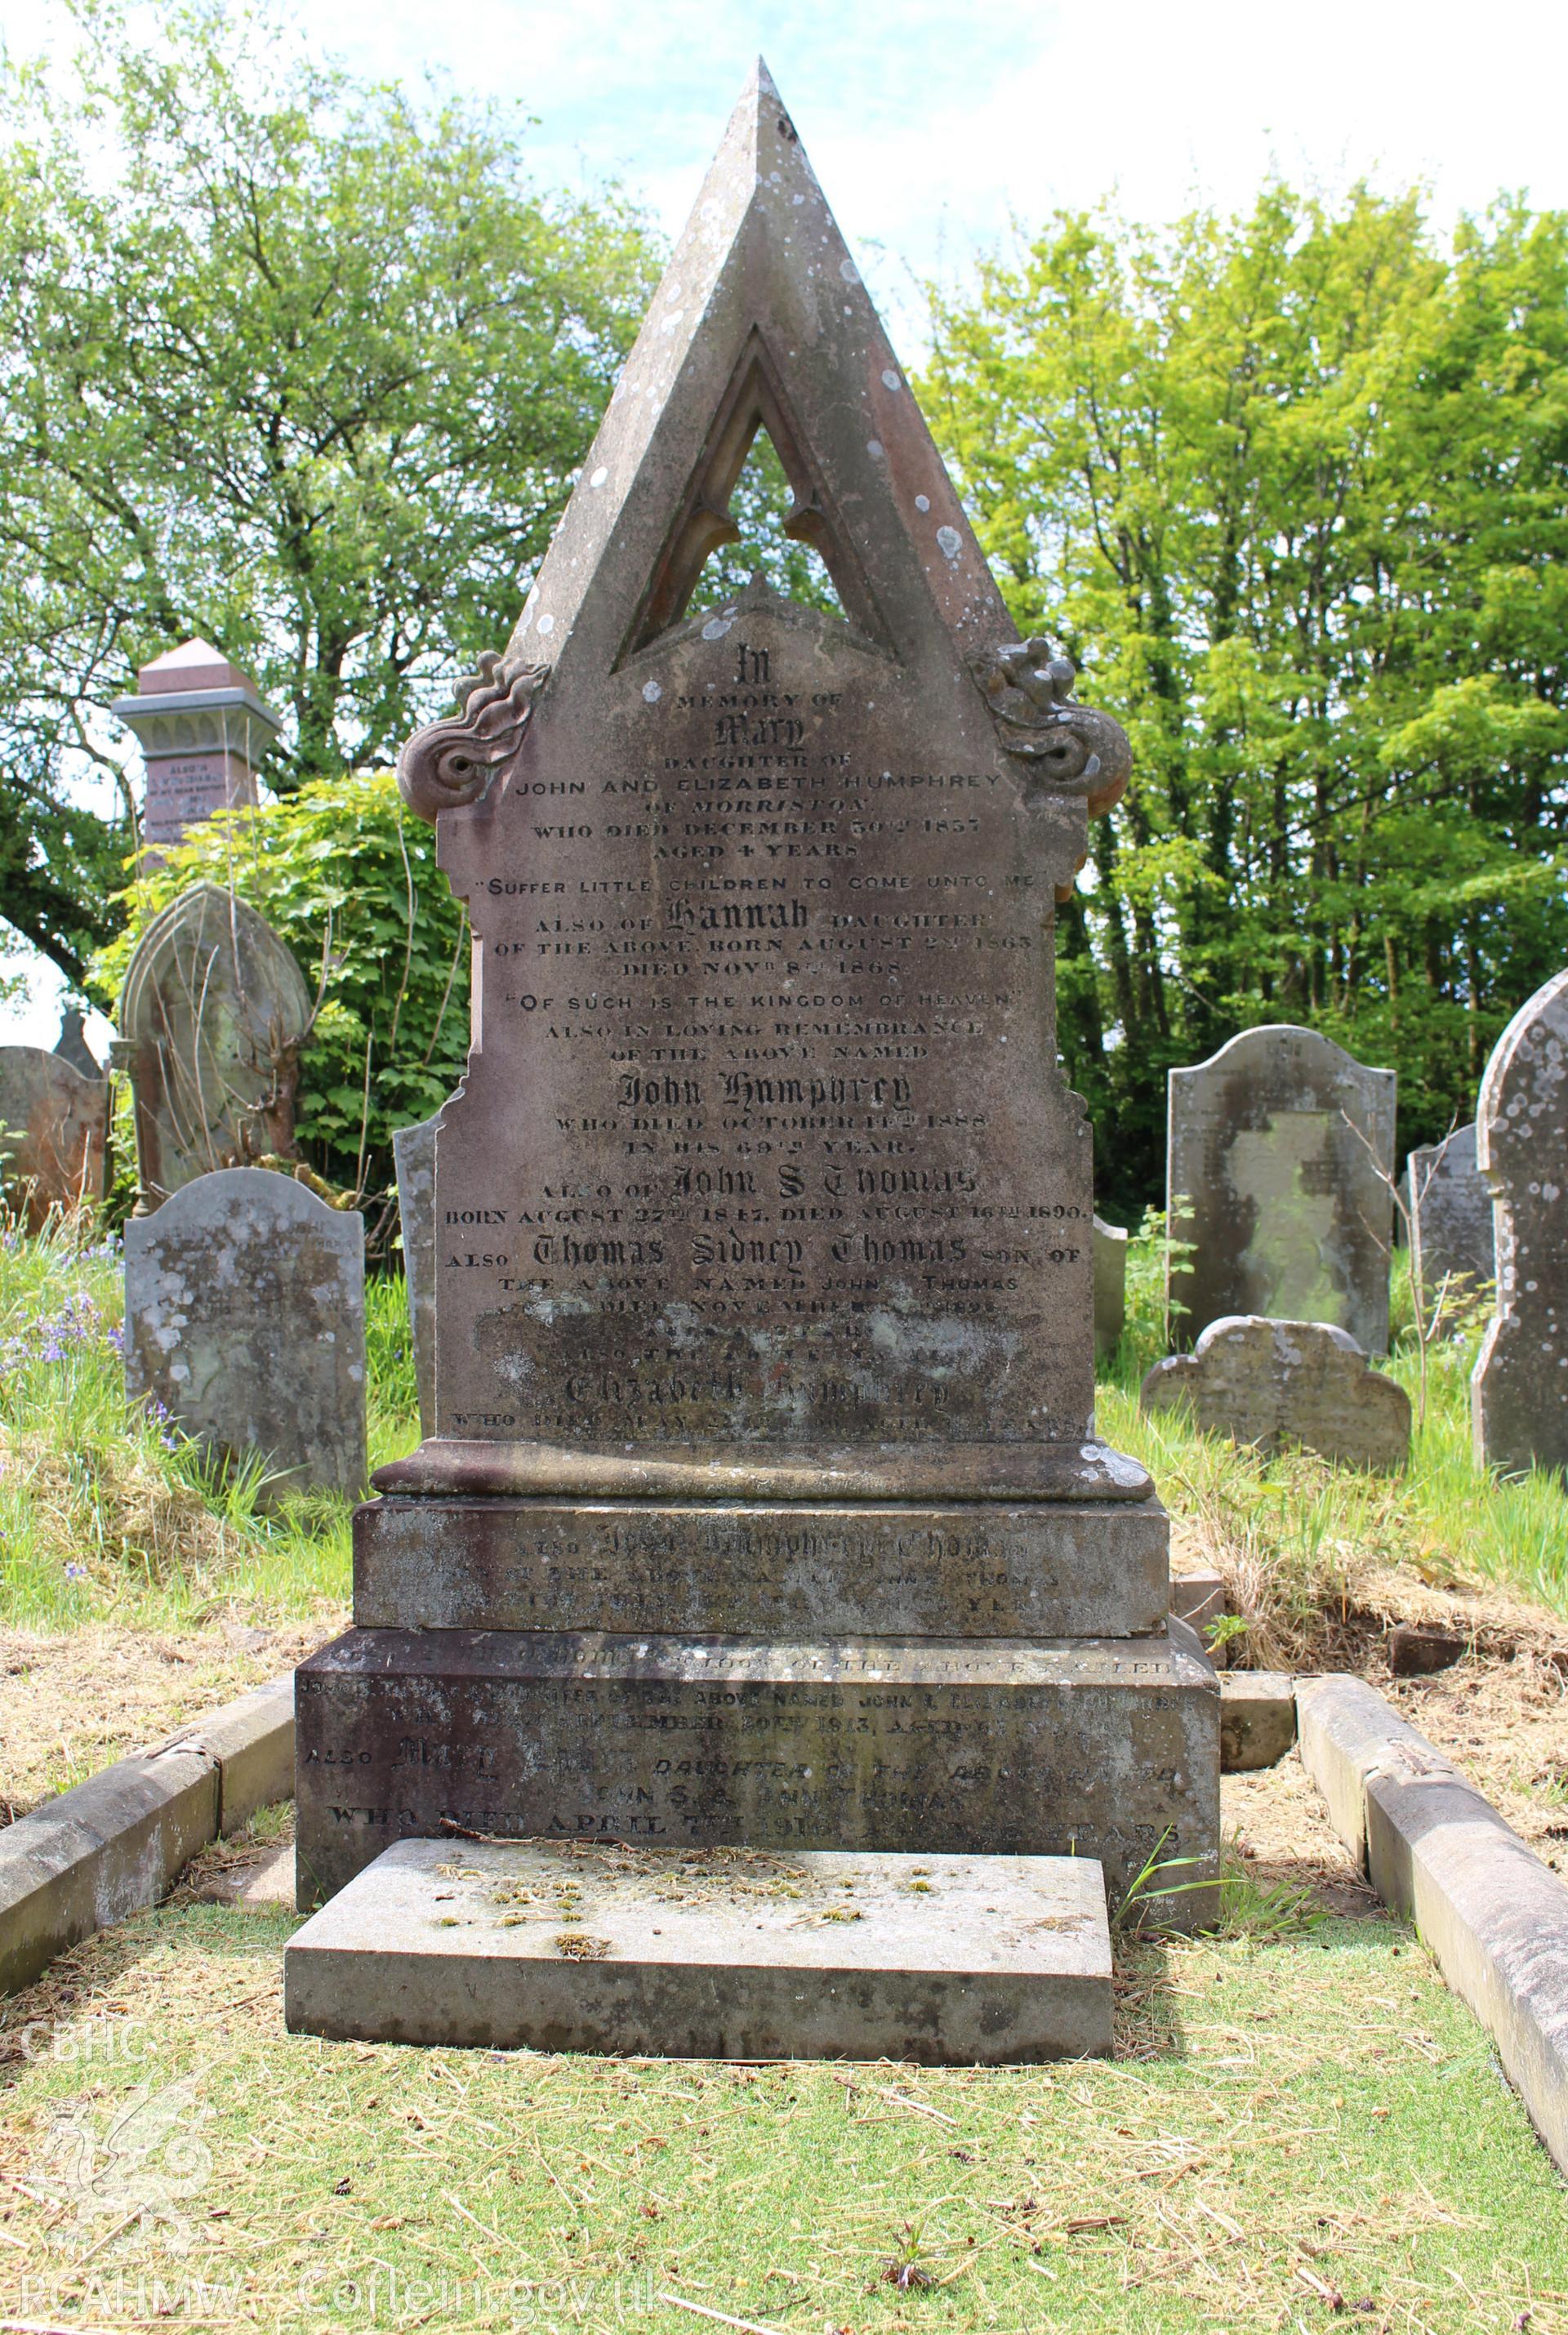 Colour photograph showing detail of family gravestone at Mynydd Bach Independent Chapel, Treboeth, Swansea. Taken during photographic survey conducted by Sue Fielding on 13th May 2017.